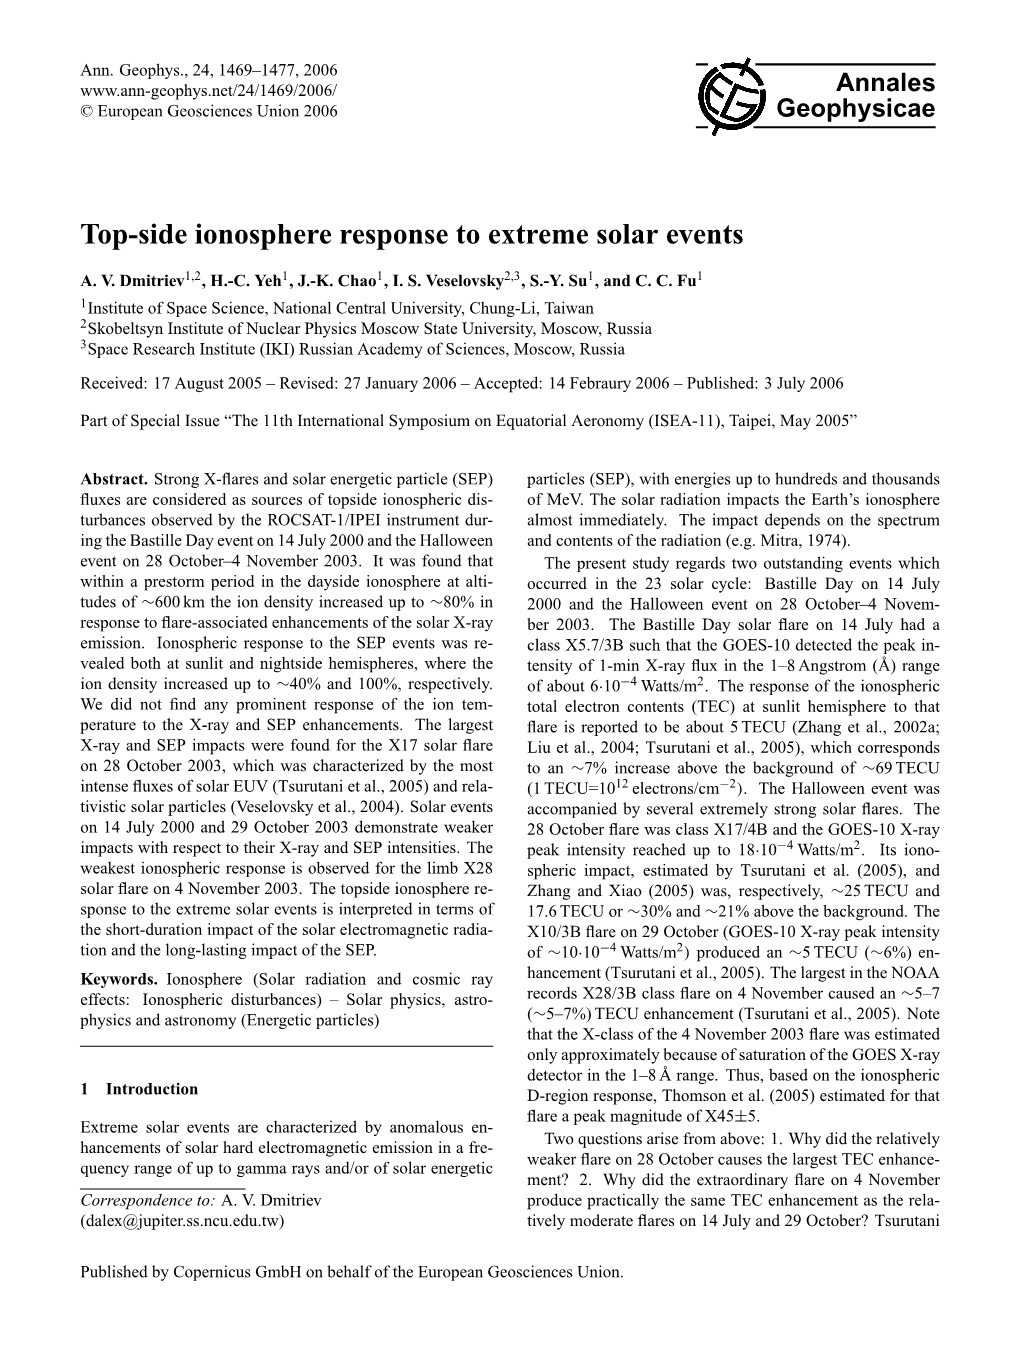 Top-Side Ionosphere Response to Extreme Solar Events